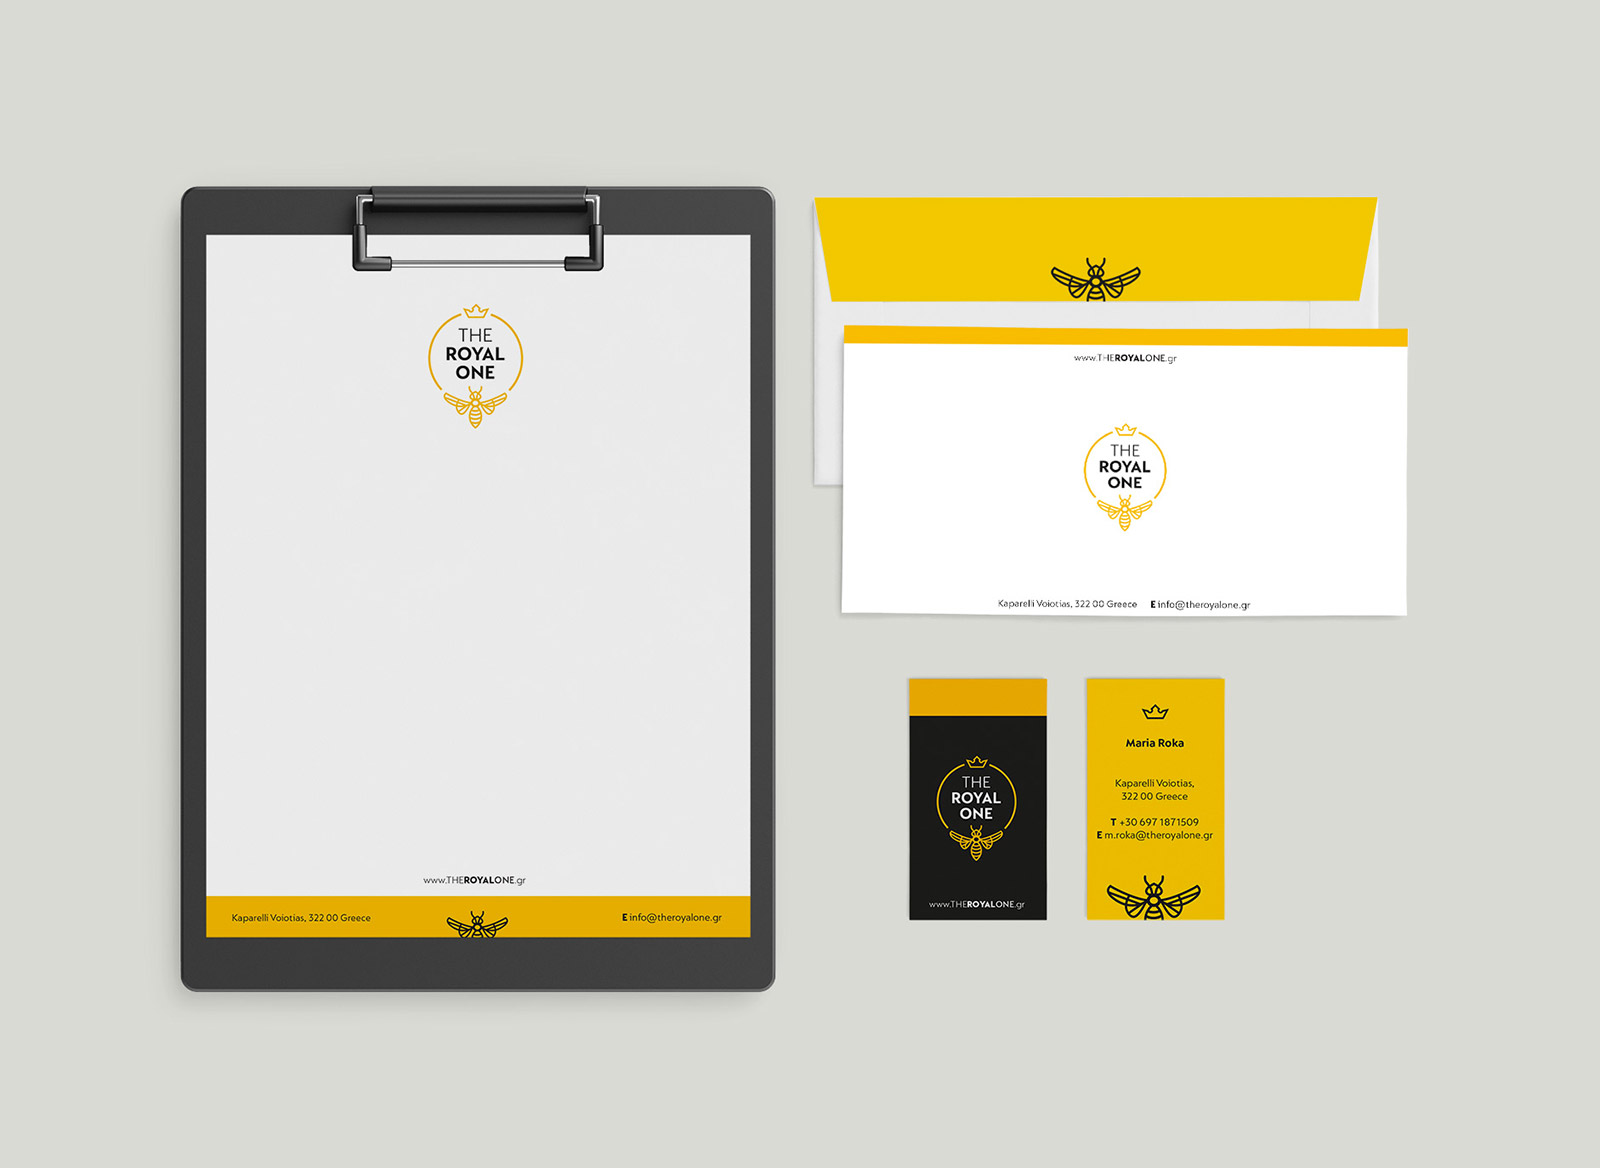 Corporate identity, letterhead, envelope and business cards modern design and for the royal one greek honey. Σχεδιασμός εταιρικής ταυτότητας, σχεδιασμός επιστολόχαρτο, σχεδιασμός φακέλου σχεδιασμός επαγγελματικών καρτών. Corporate identity, letterhead, envelope and business cards modern design and for the royal one greek honey.